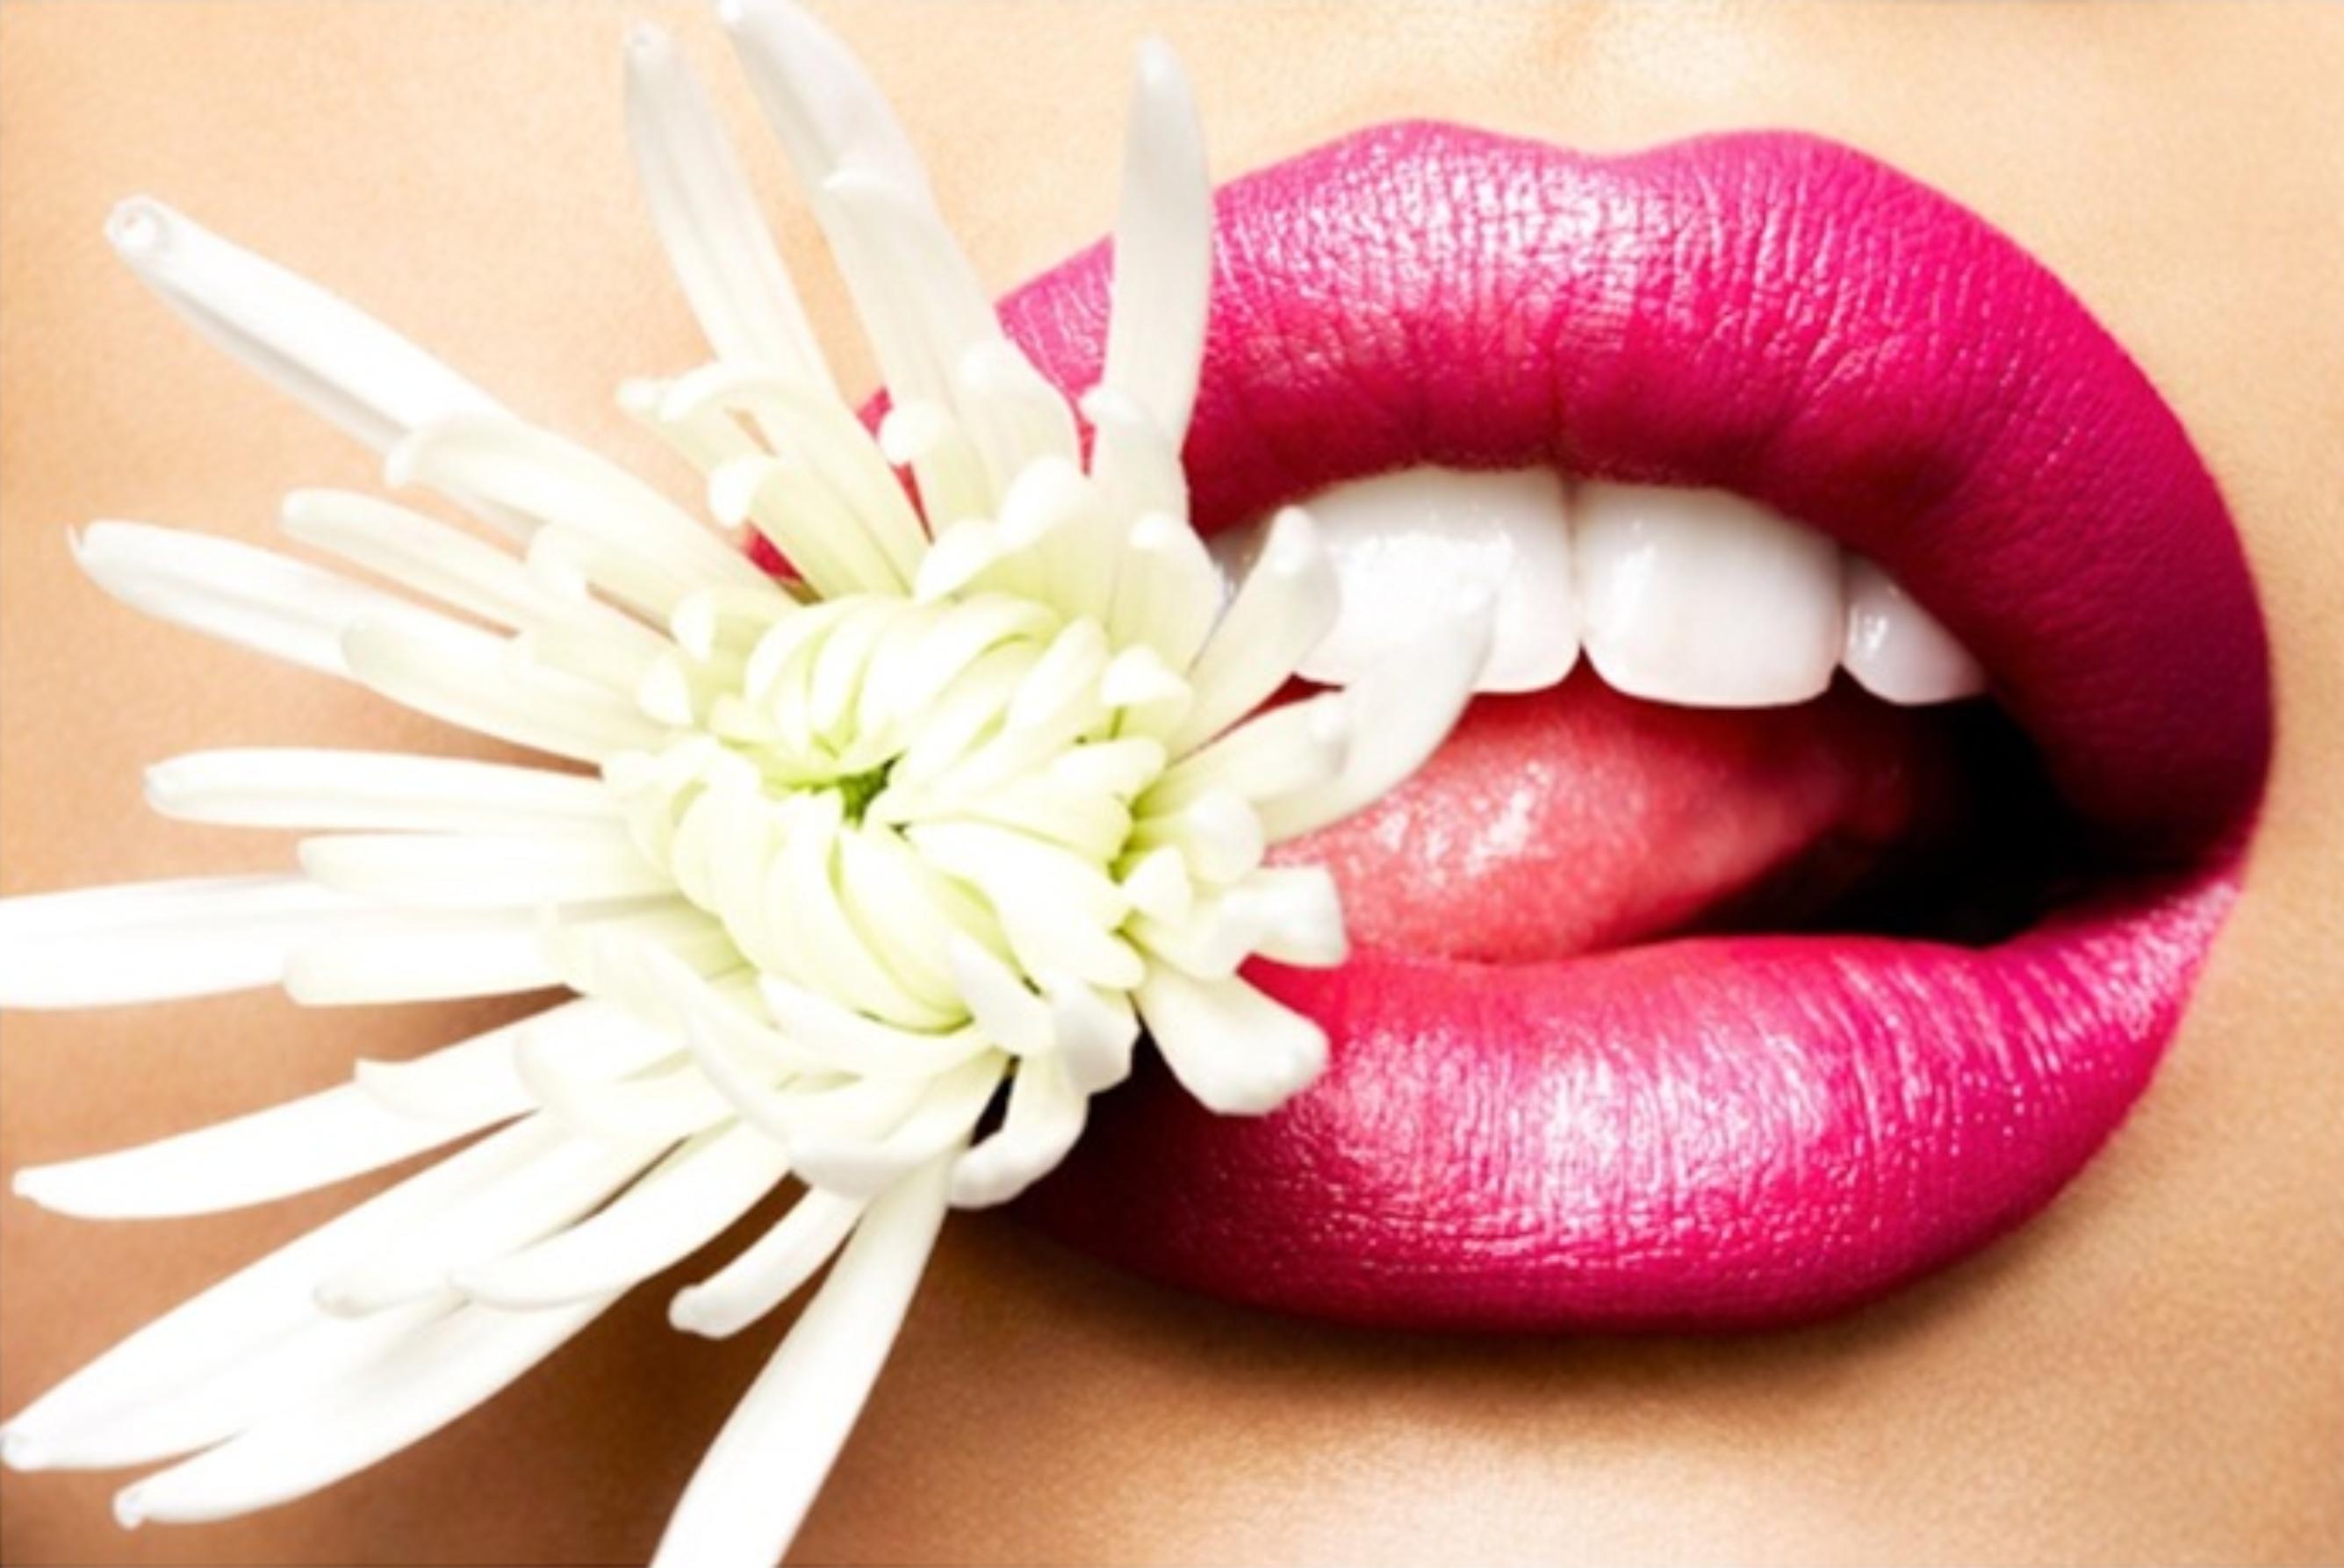 Rankin Color Photograph - Chrysanthemum Bitten - model with pink lips biting a white flower